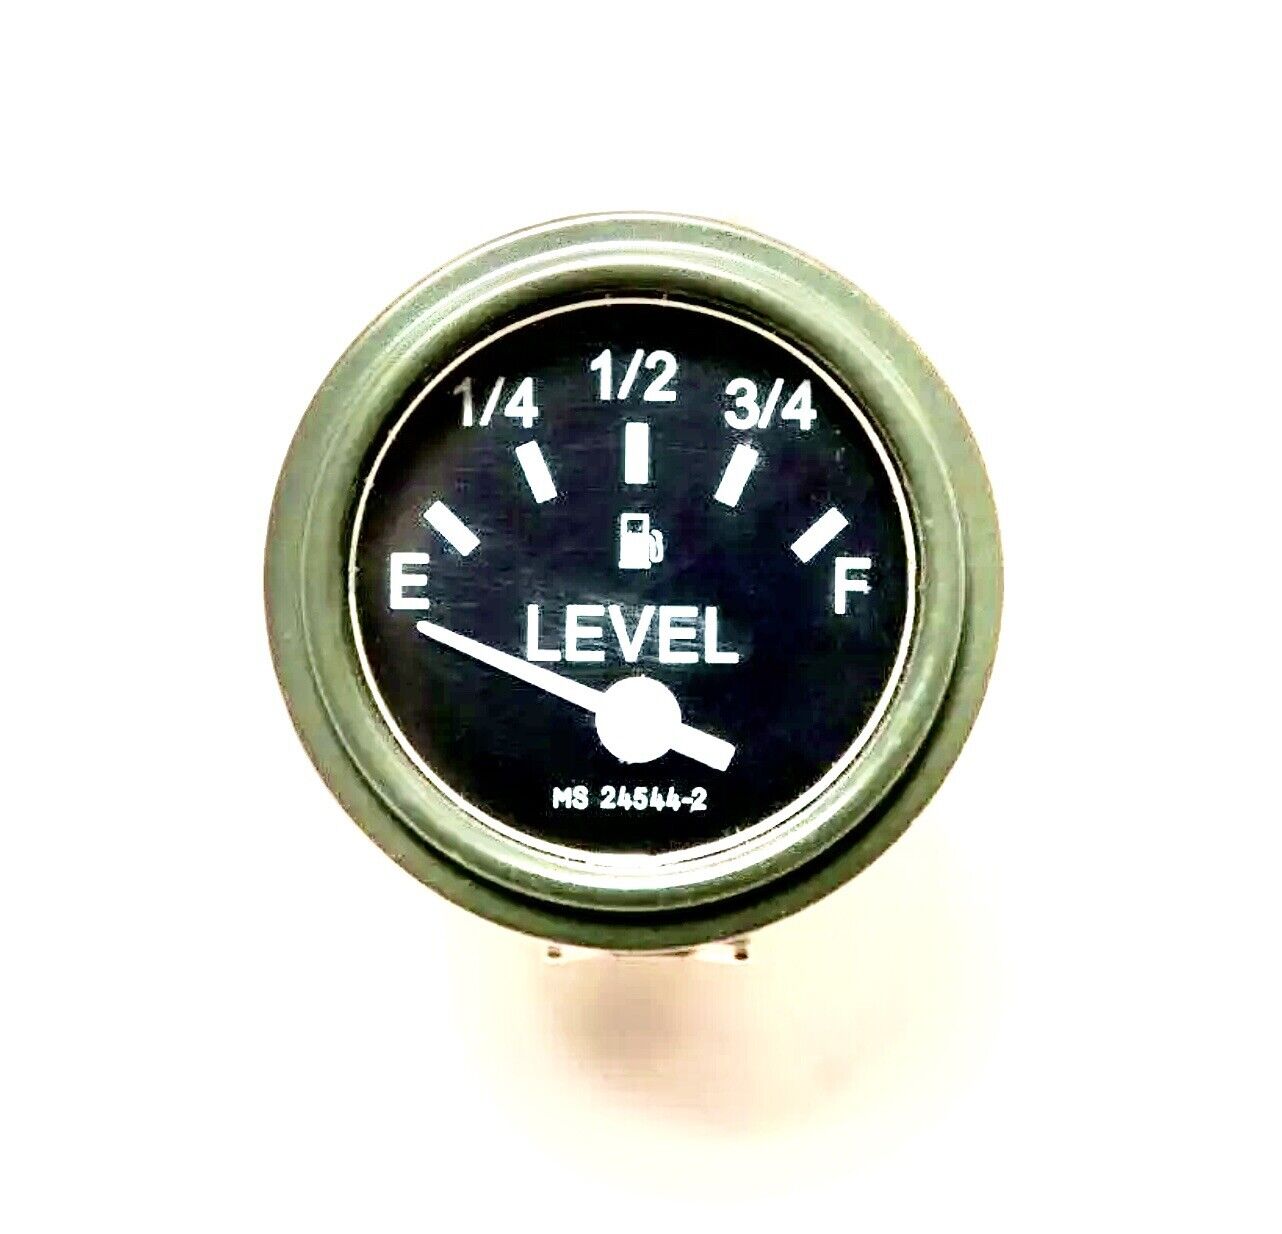 Replacement Fuel Level Gauge MS24544-2 fits M-Series Truck Humvee M35 M939